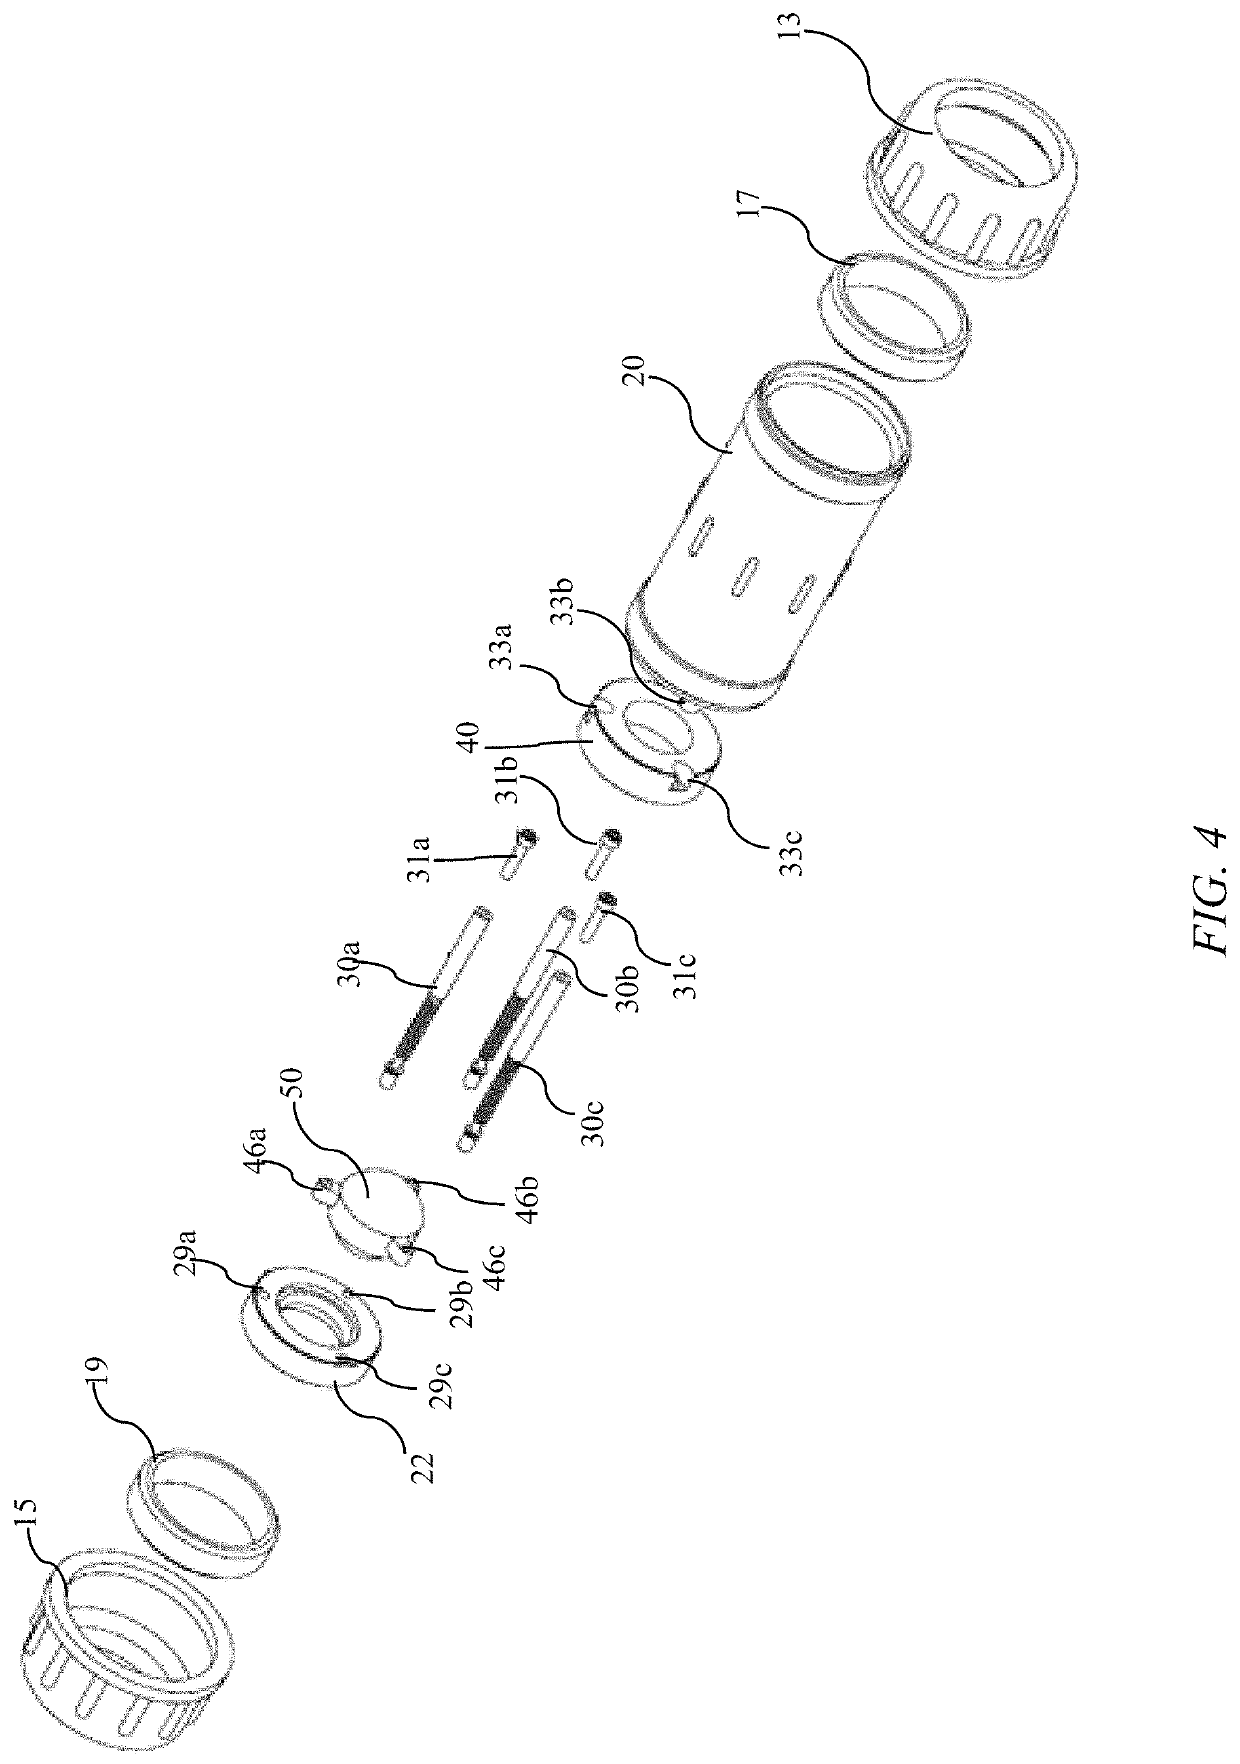 Apparatus, systems and methods for managing fluids comprising a poppet valve having multiple springs